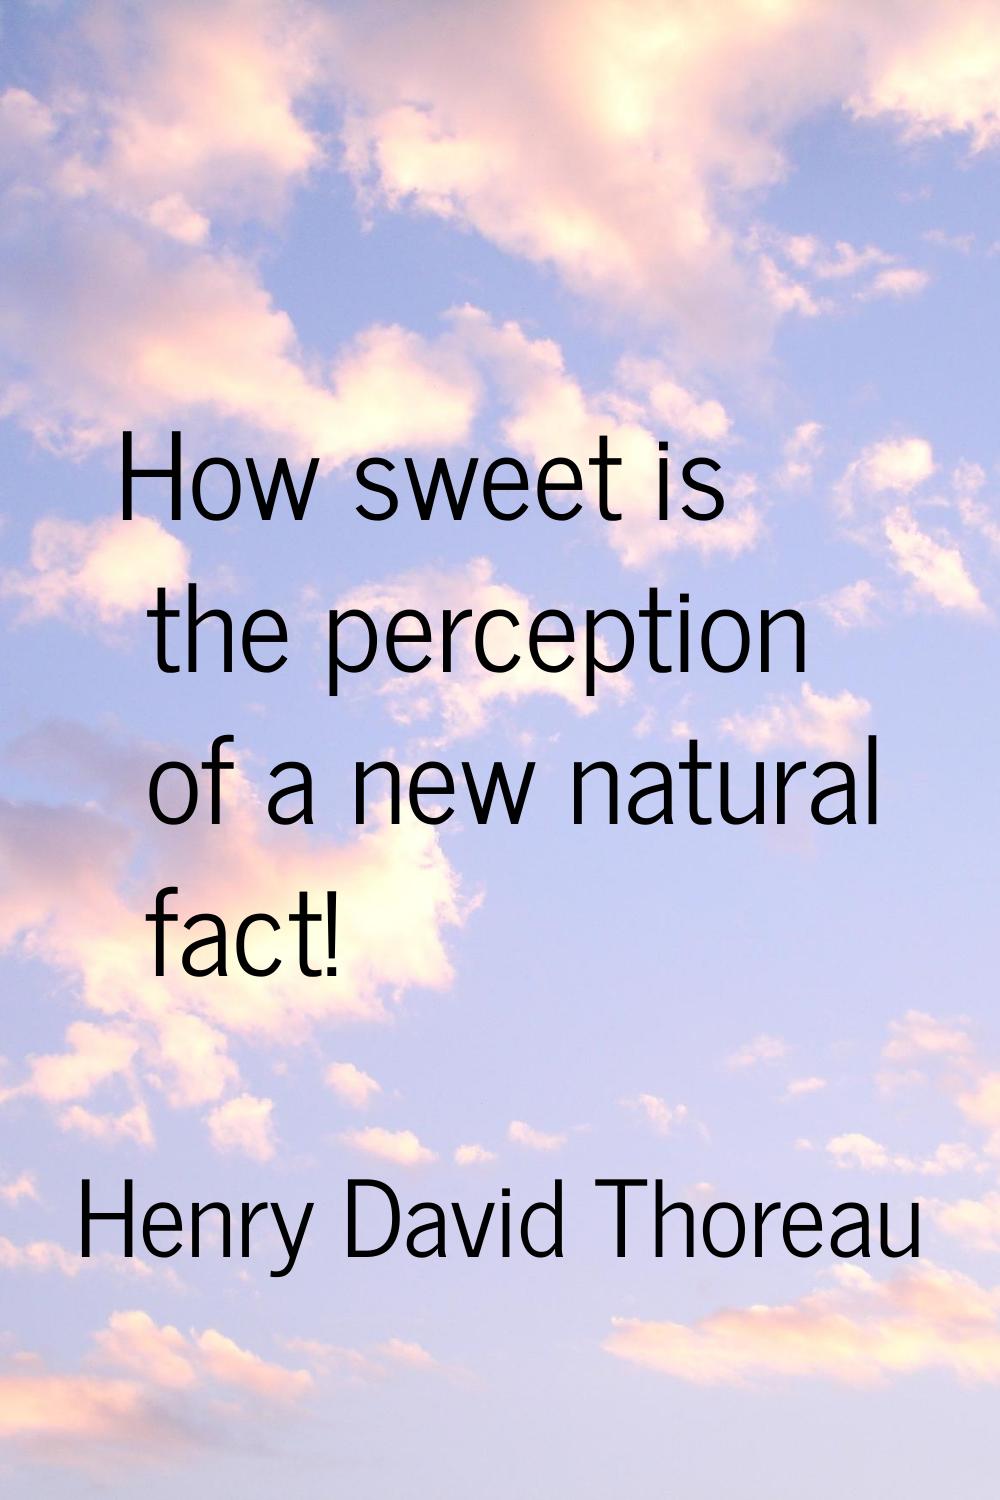 How sweet is the perception of a new natural fact!